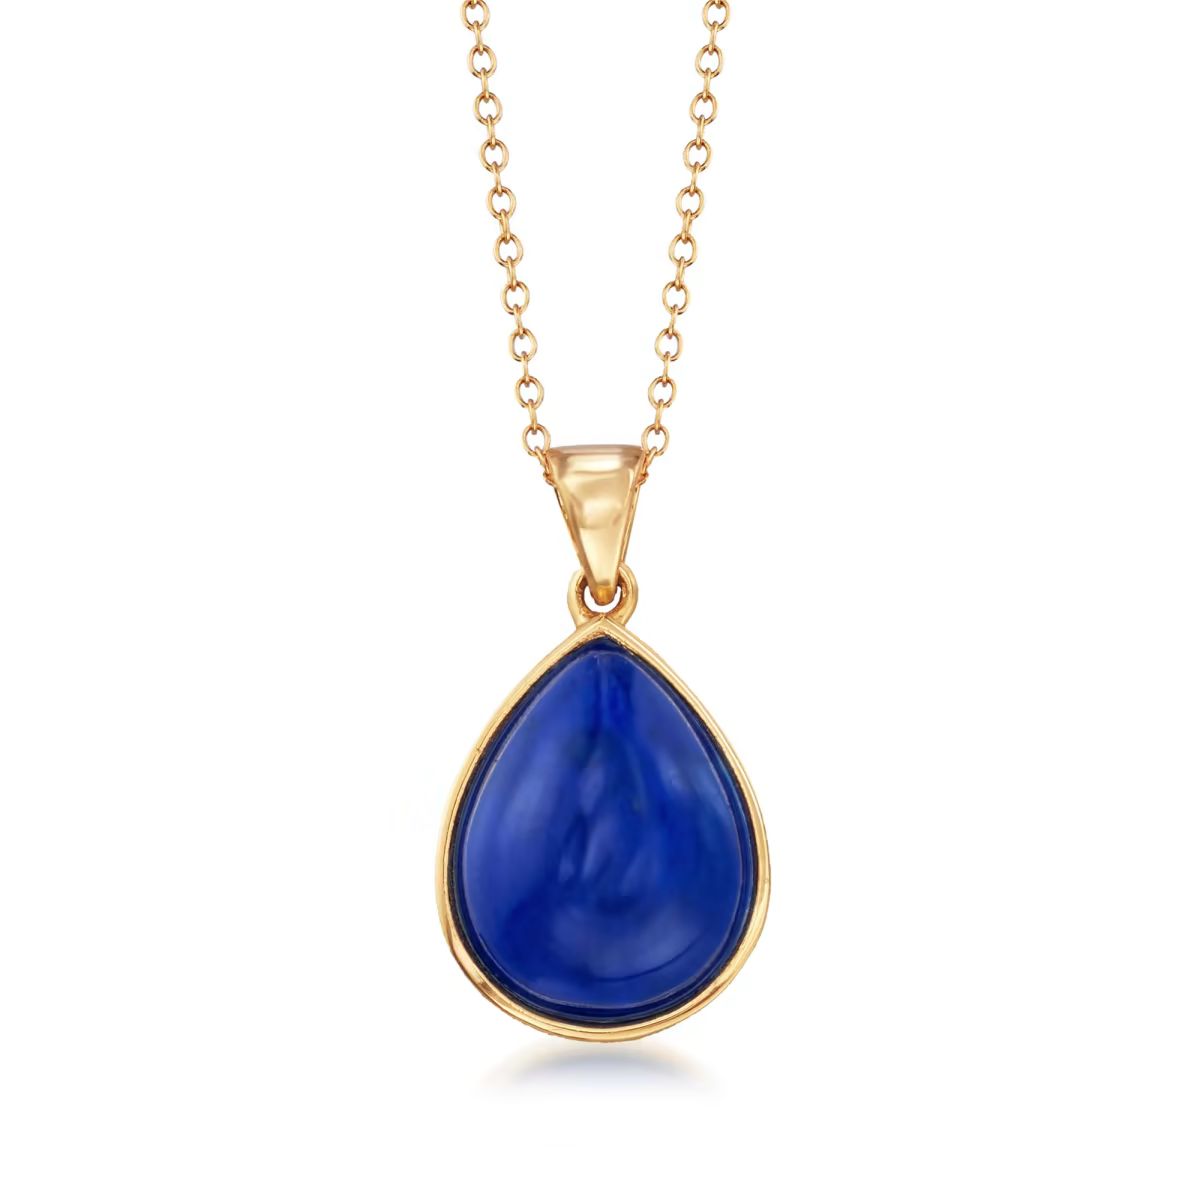 Pear-Shaped Lapis Cabochon Pendant Necklace in 18kt Gold Over Sterling. 18" | Ross-Simons